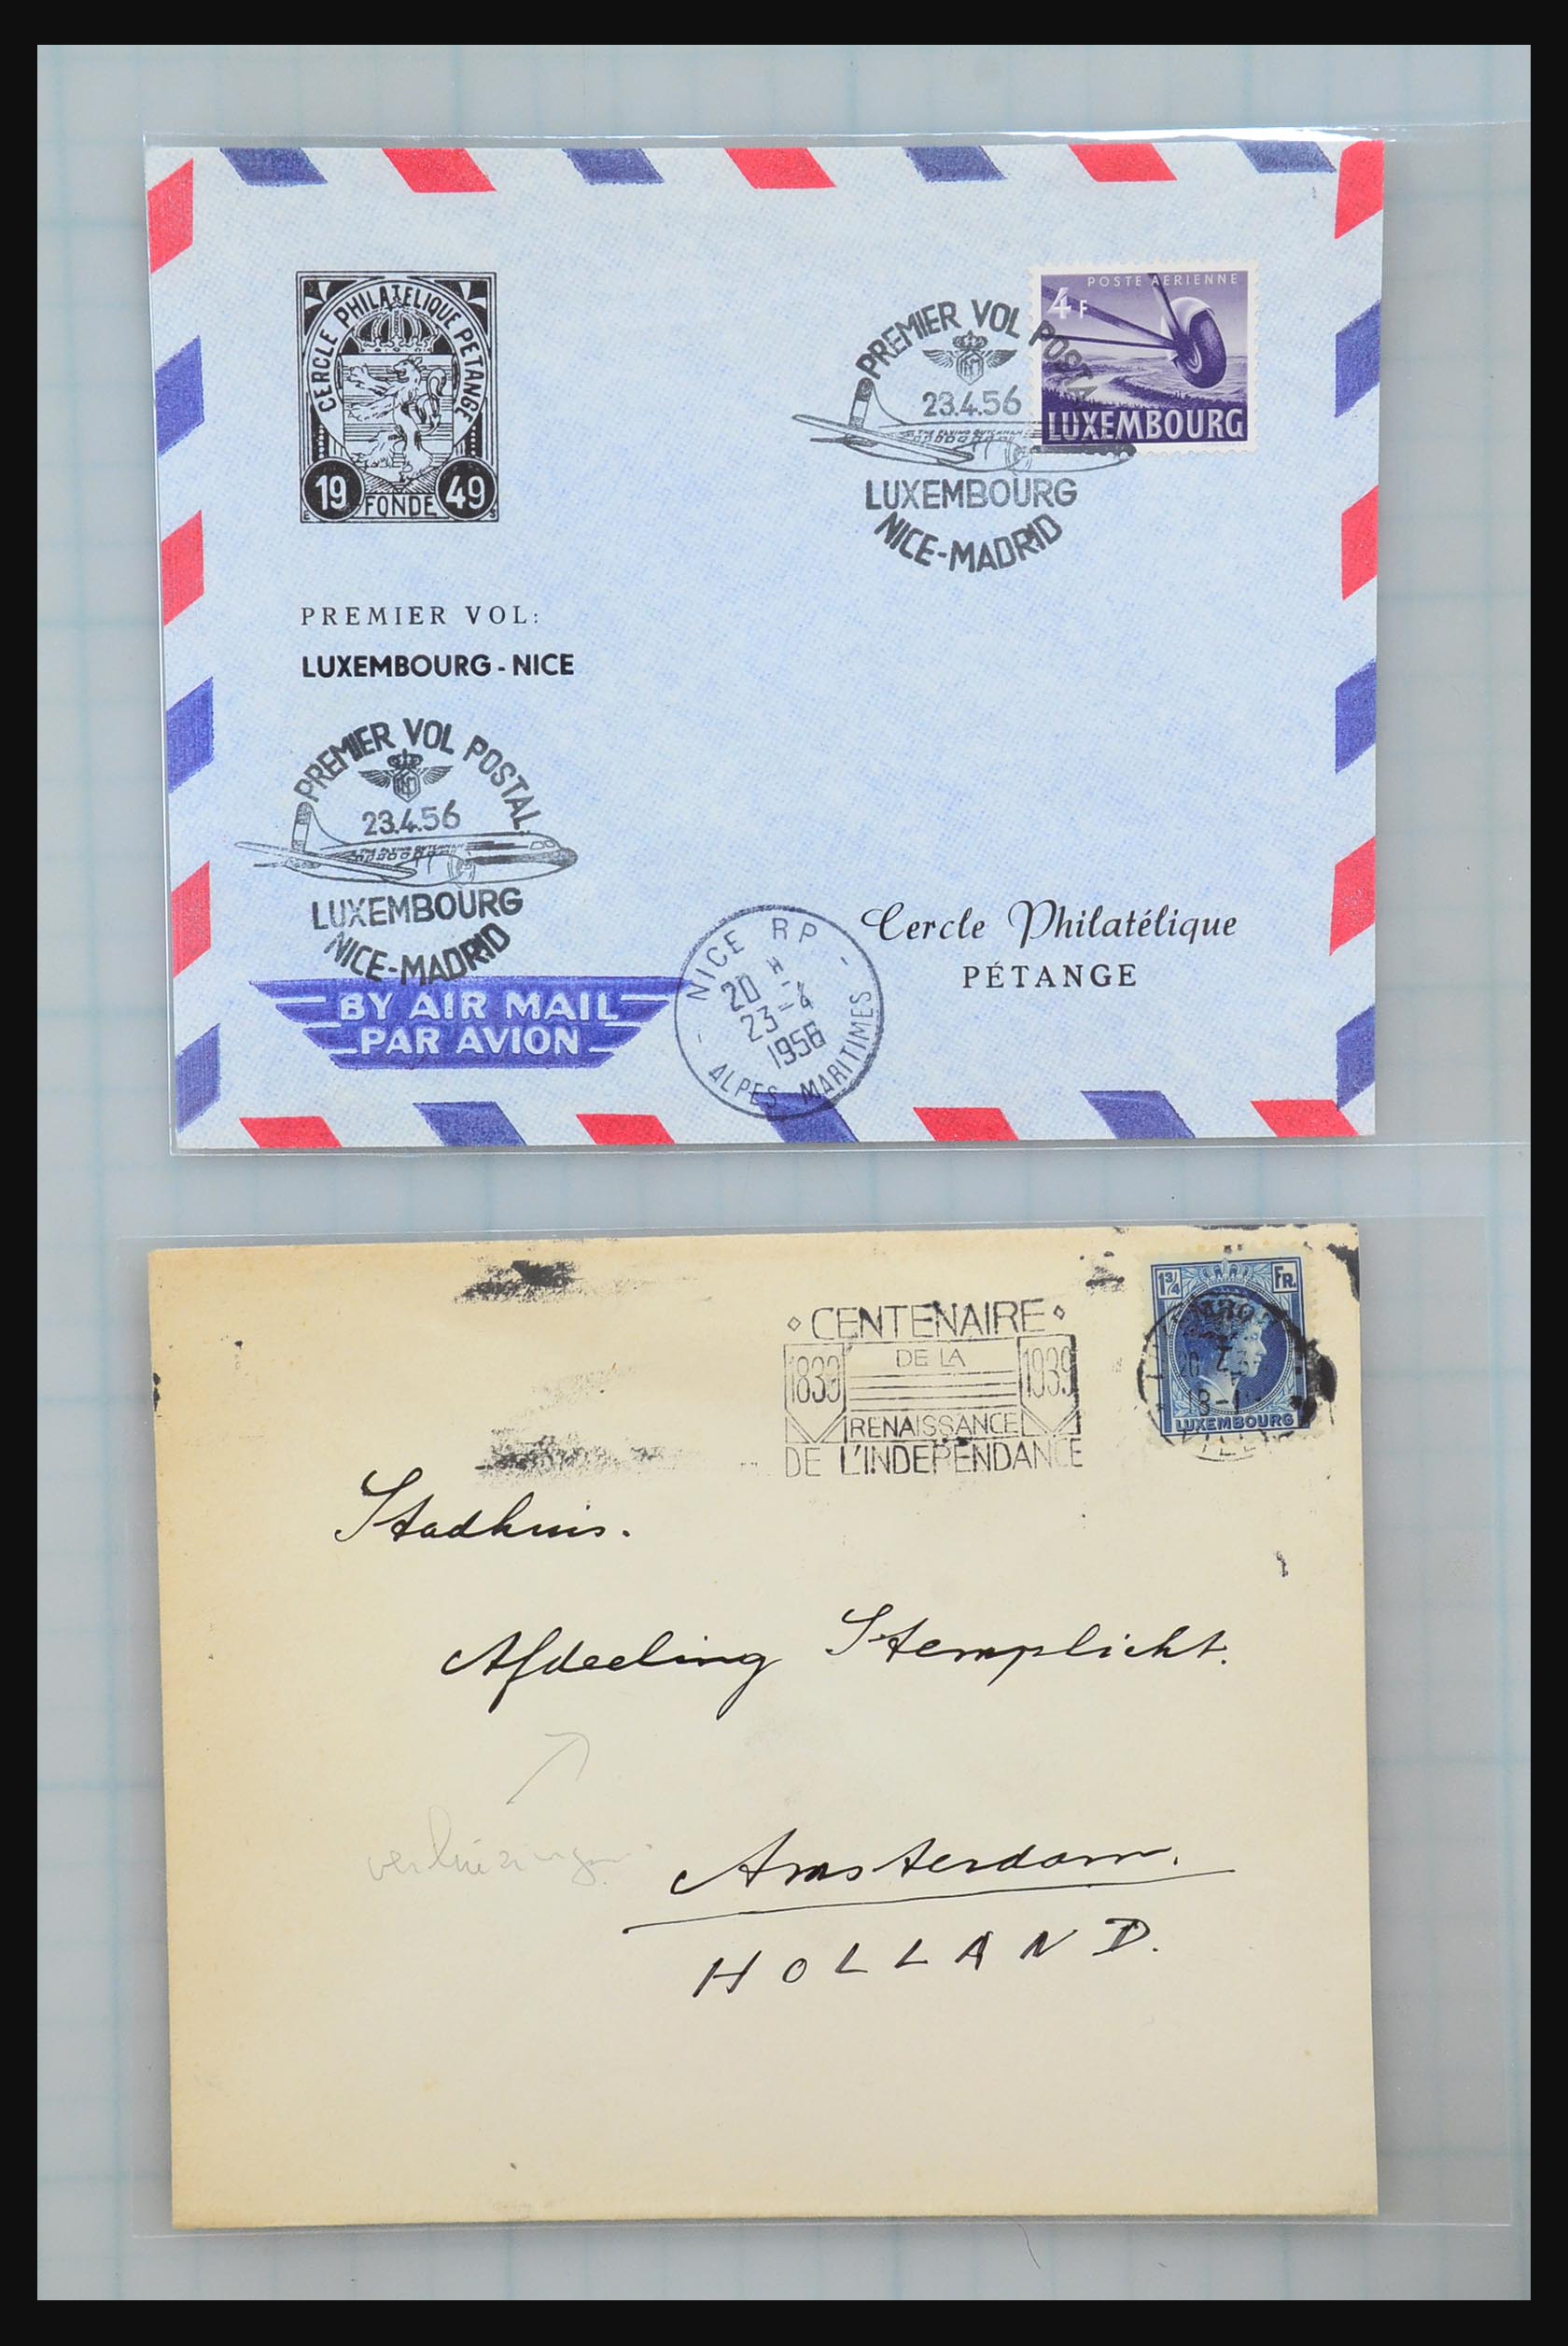 31358 071 - 31358 Portugal/Luxemburg/Greece covers 1880-1960.